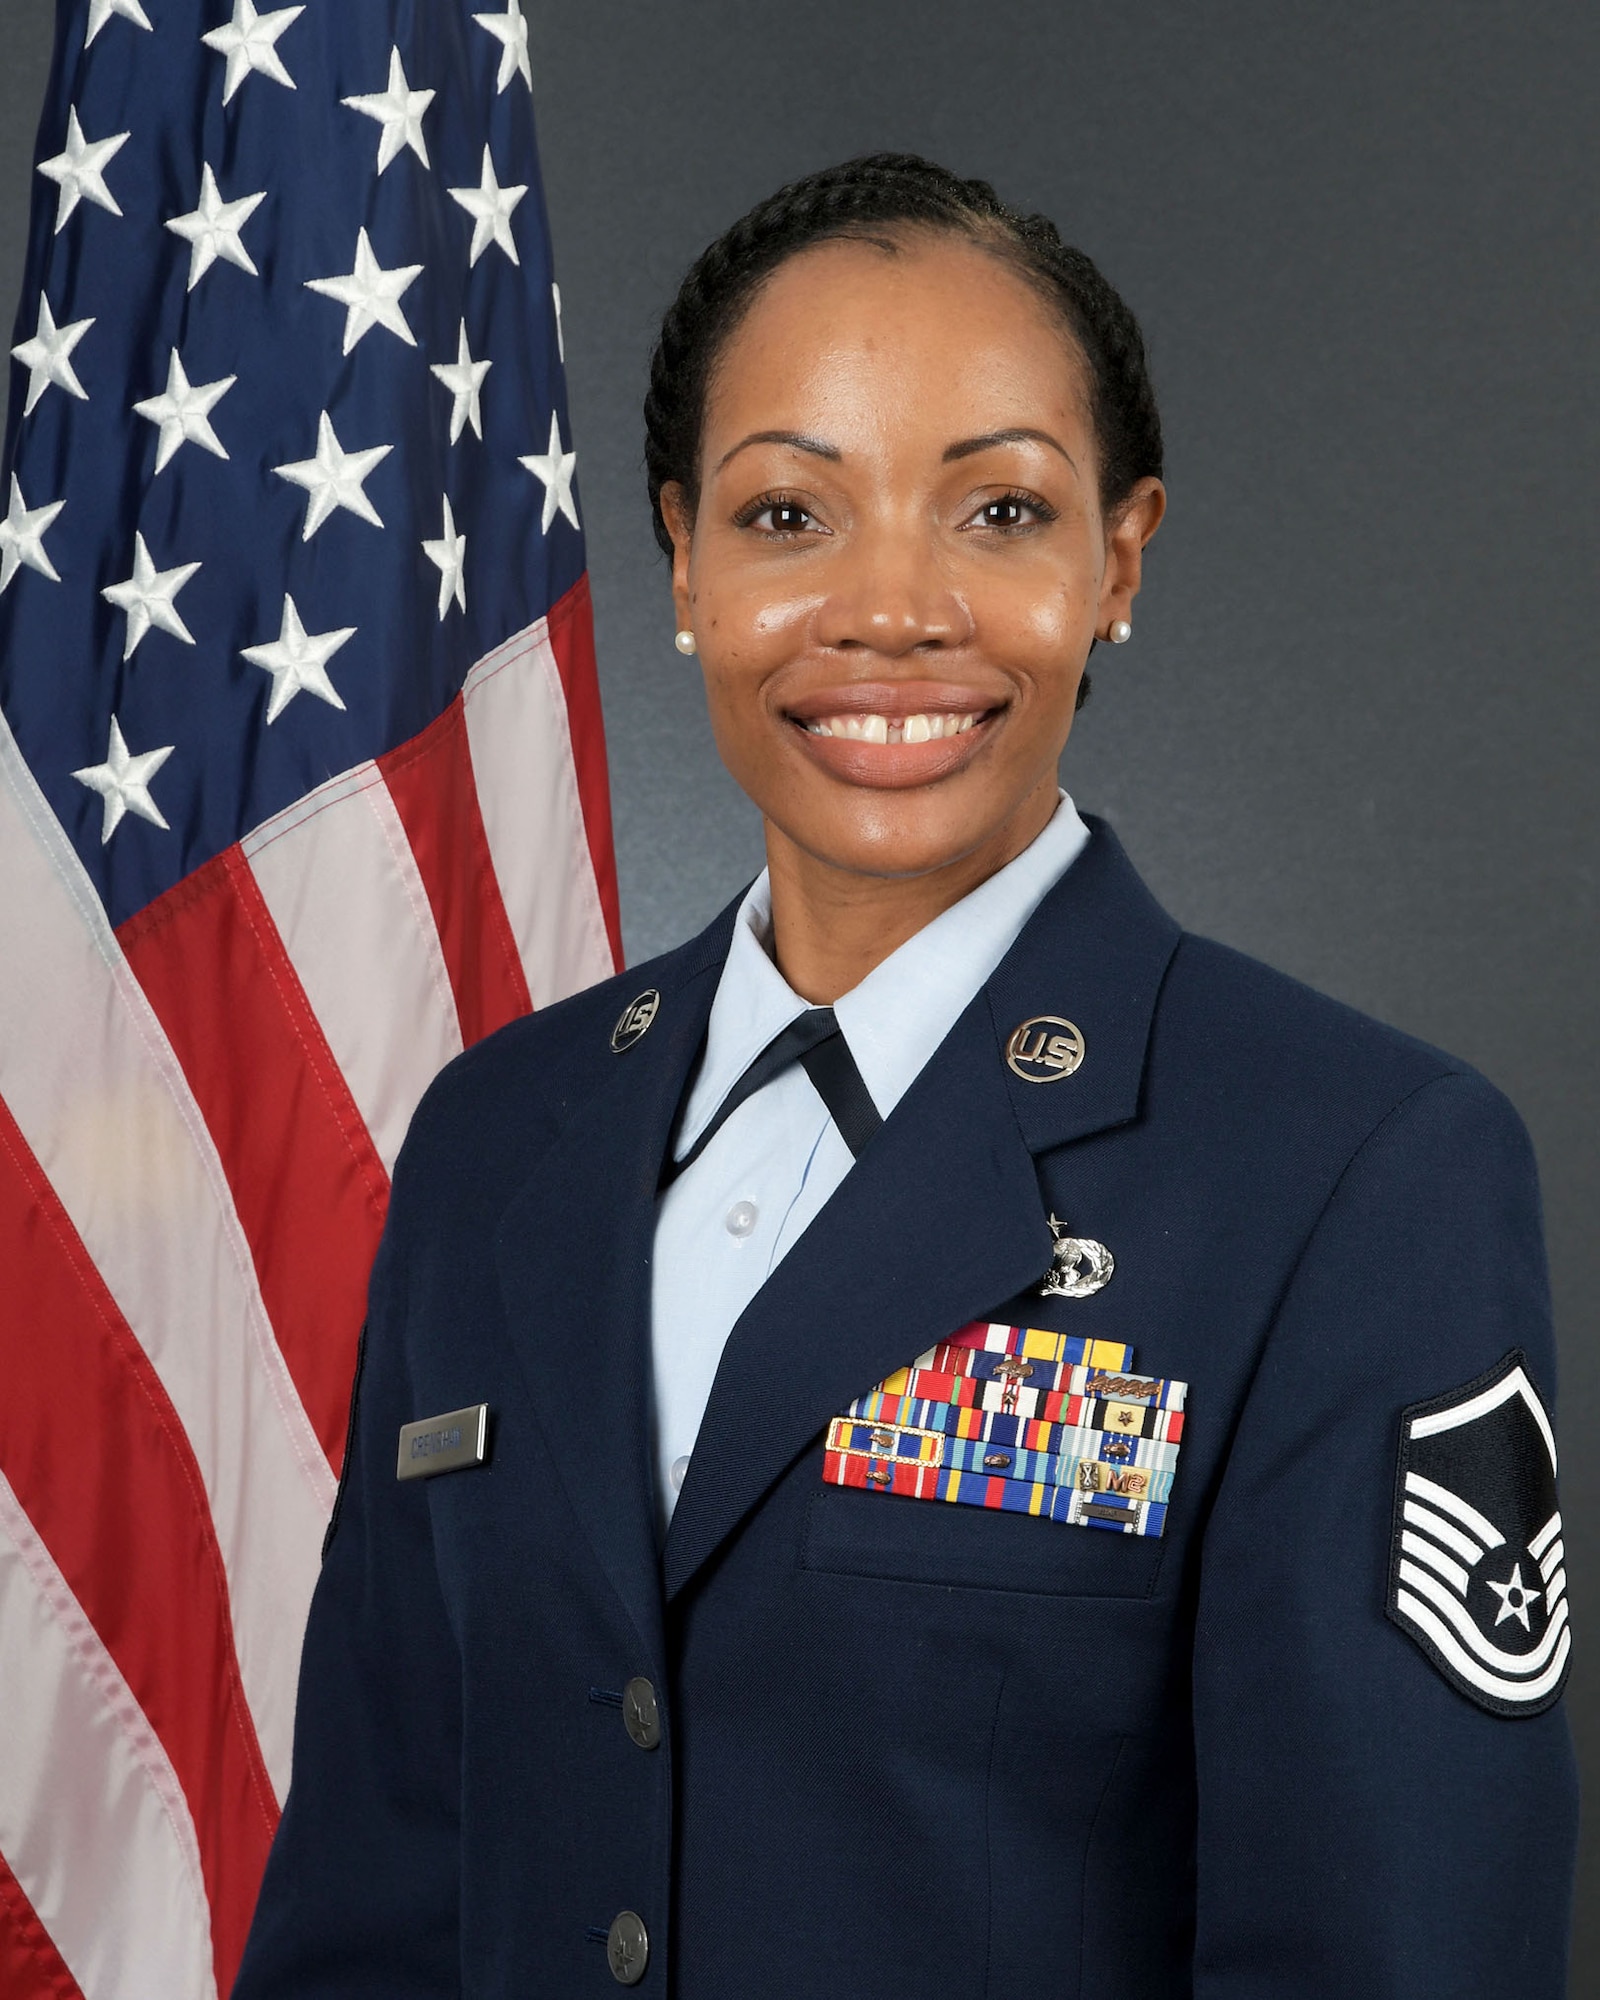 Air Force Reserve Command’s Outstanding Senior NCO of the Year is Master Sgt. Sandra M. Crenshaw, 94th Airlift Wing, Dobbins Air Reserve Base, Georgia. (U.S. Air Force photo)